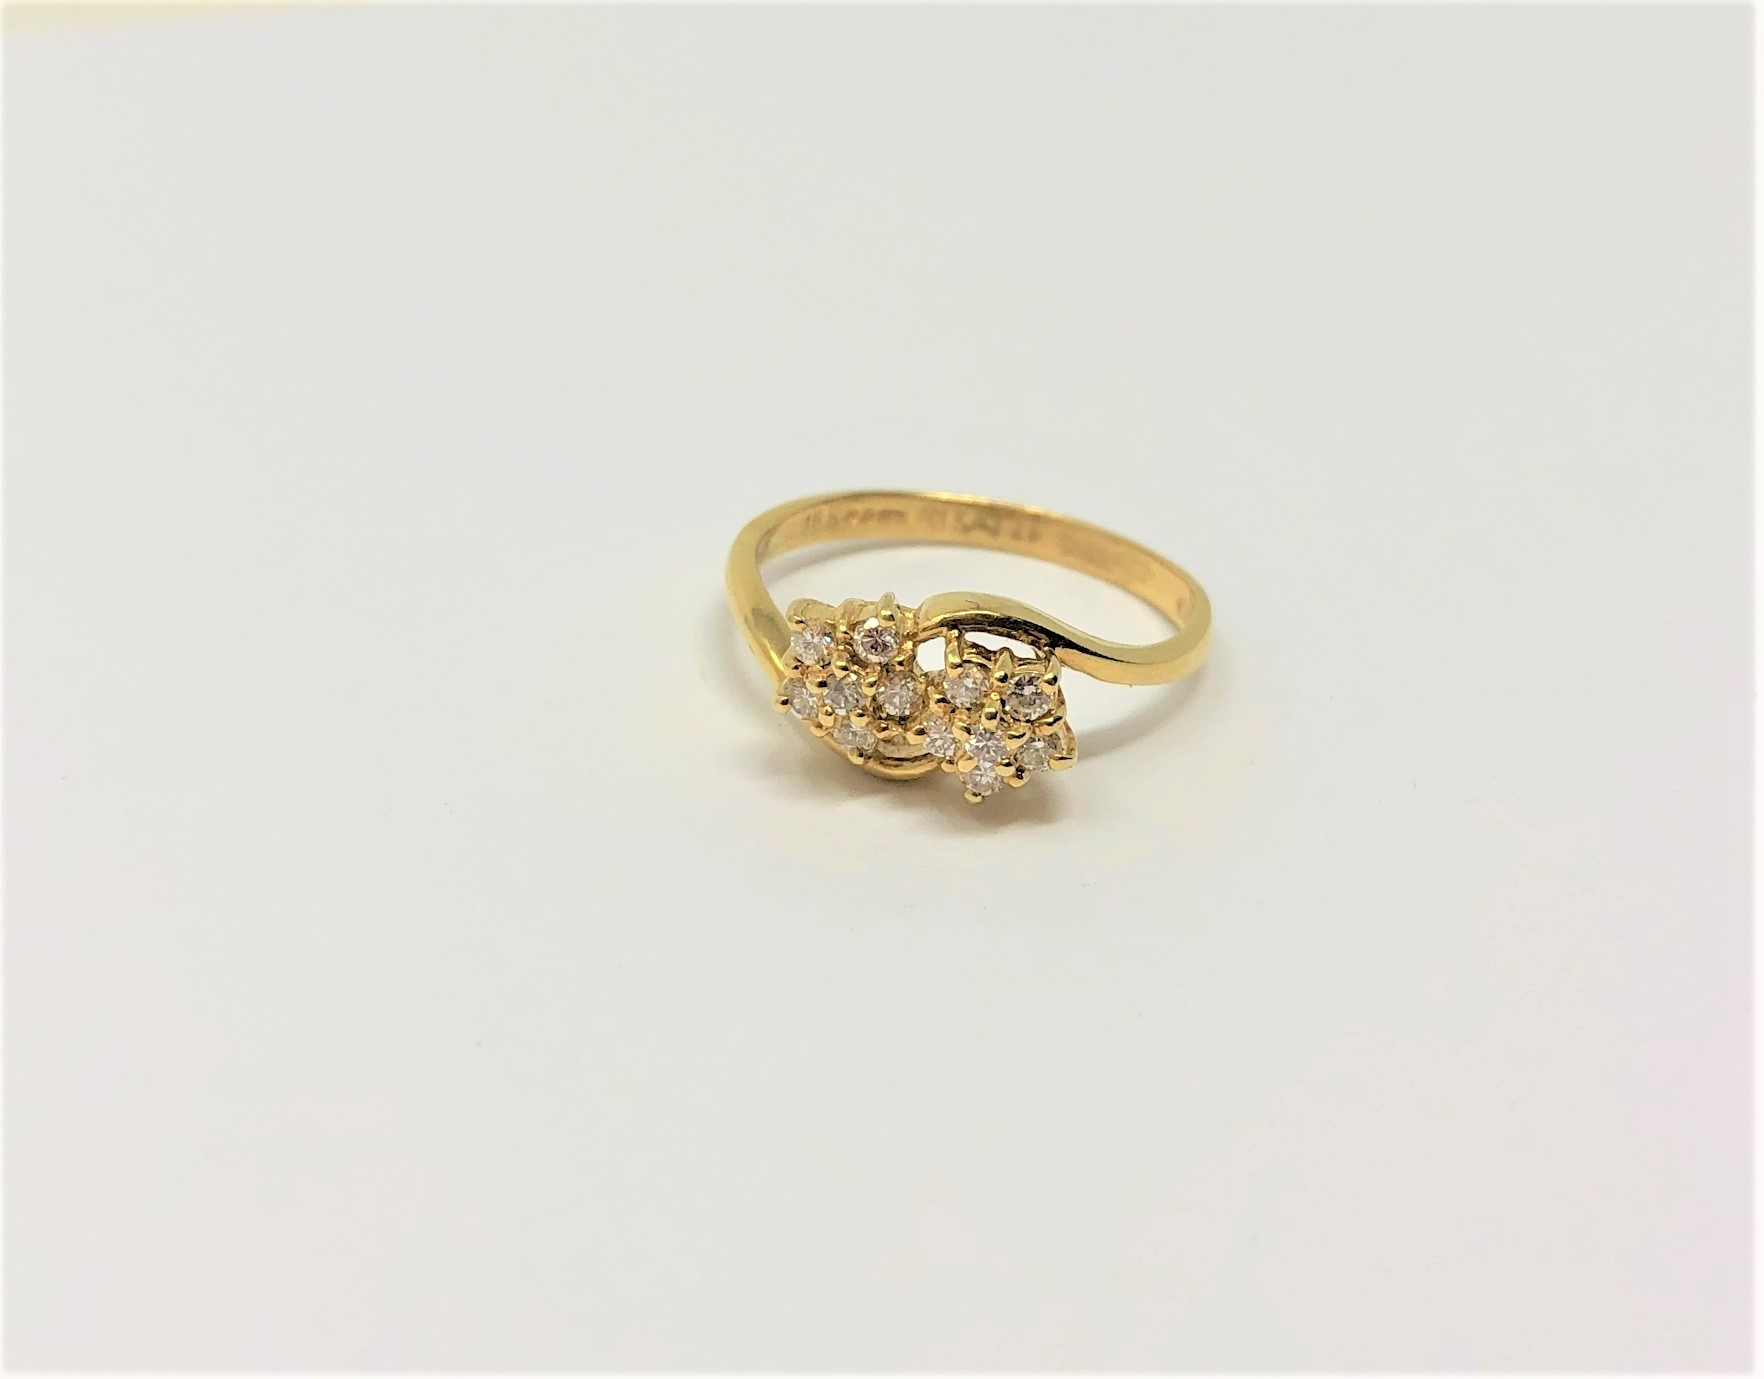 An 18ct gold double diamond cluster ring, 2.77g.